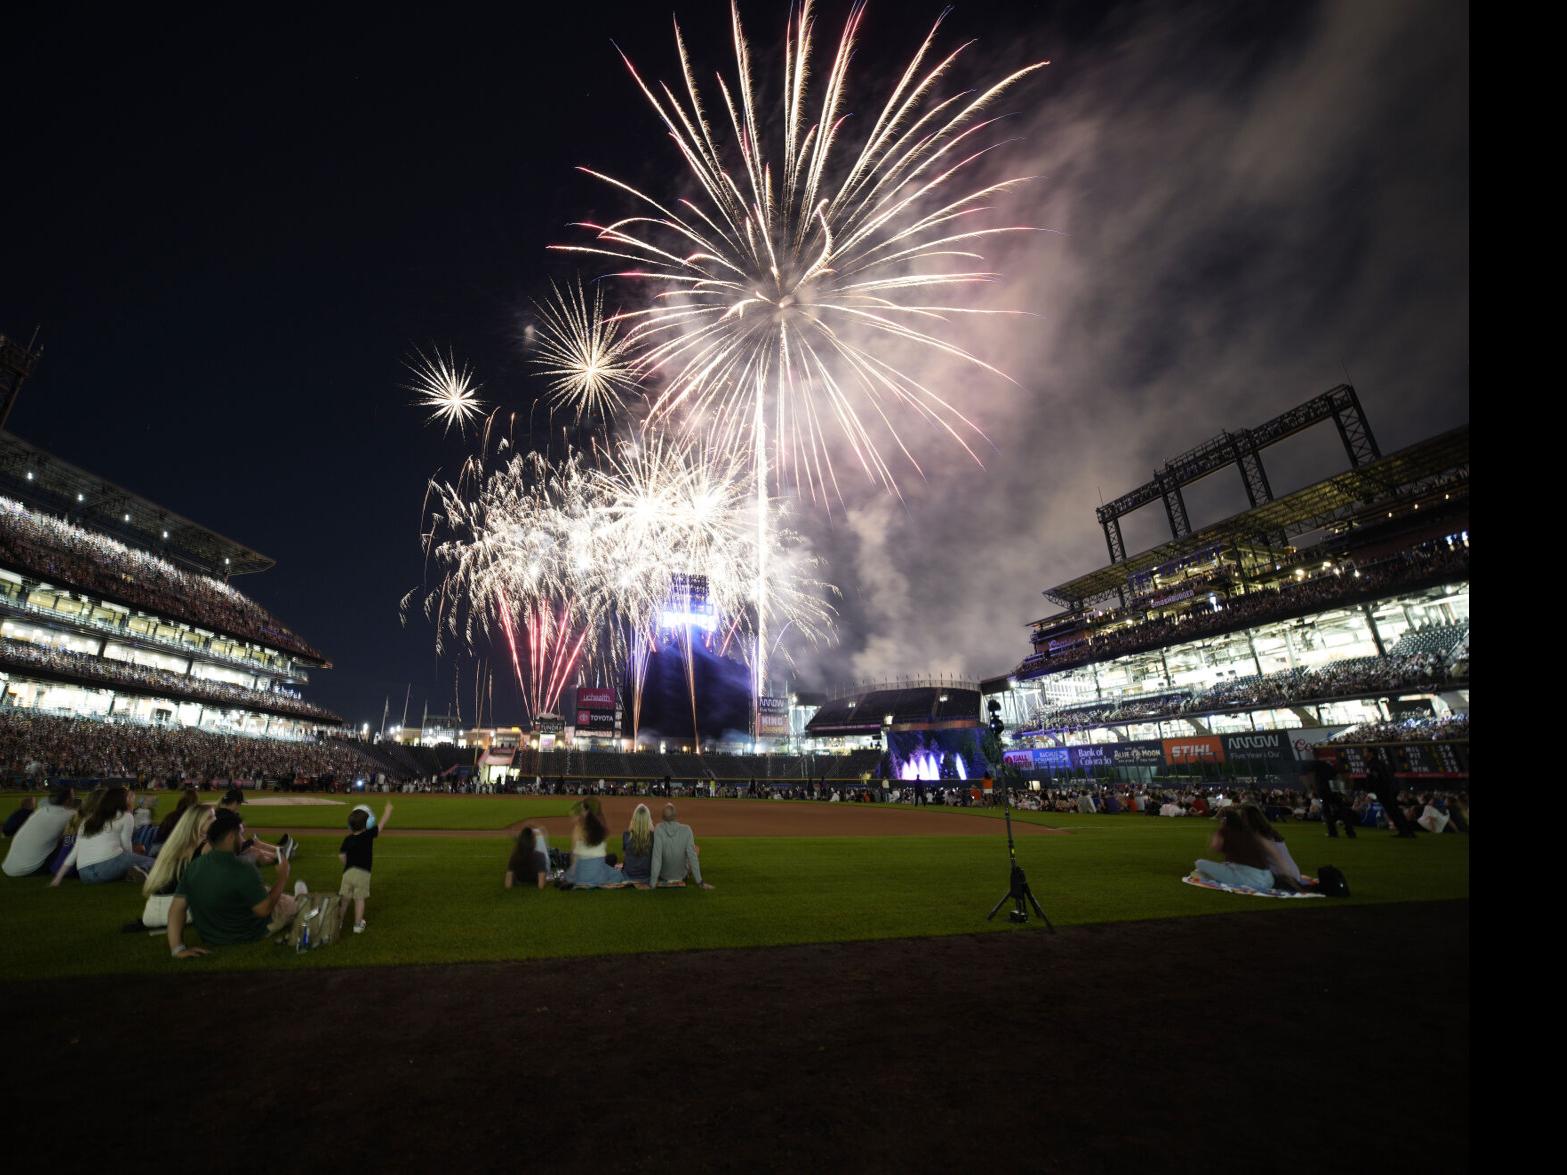 Colorado Rockies: The 7 Things Rockies Fans Must Never Do